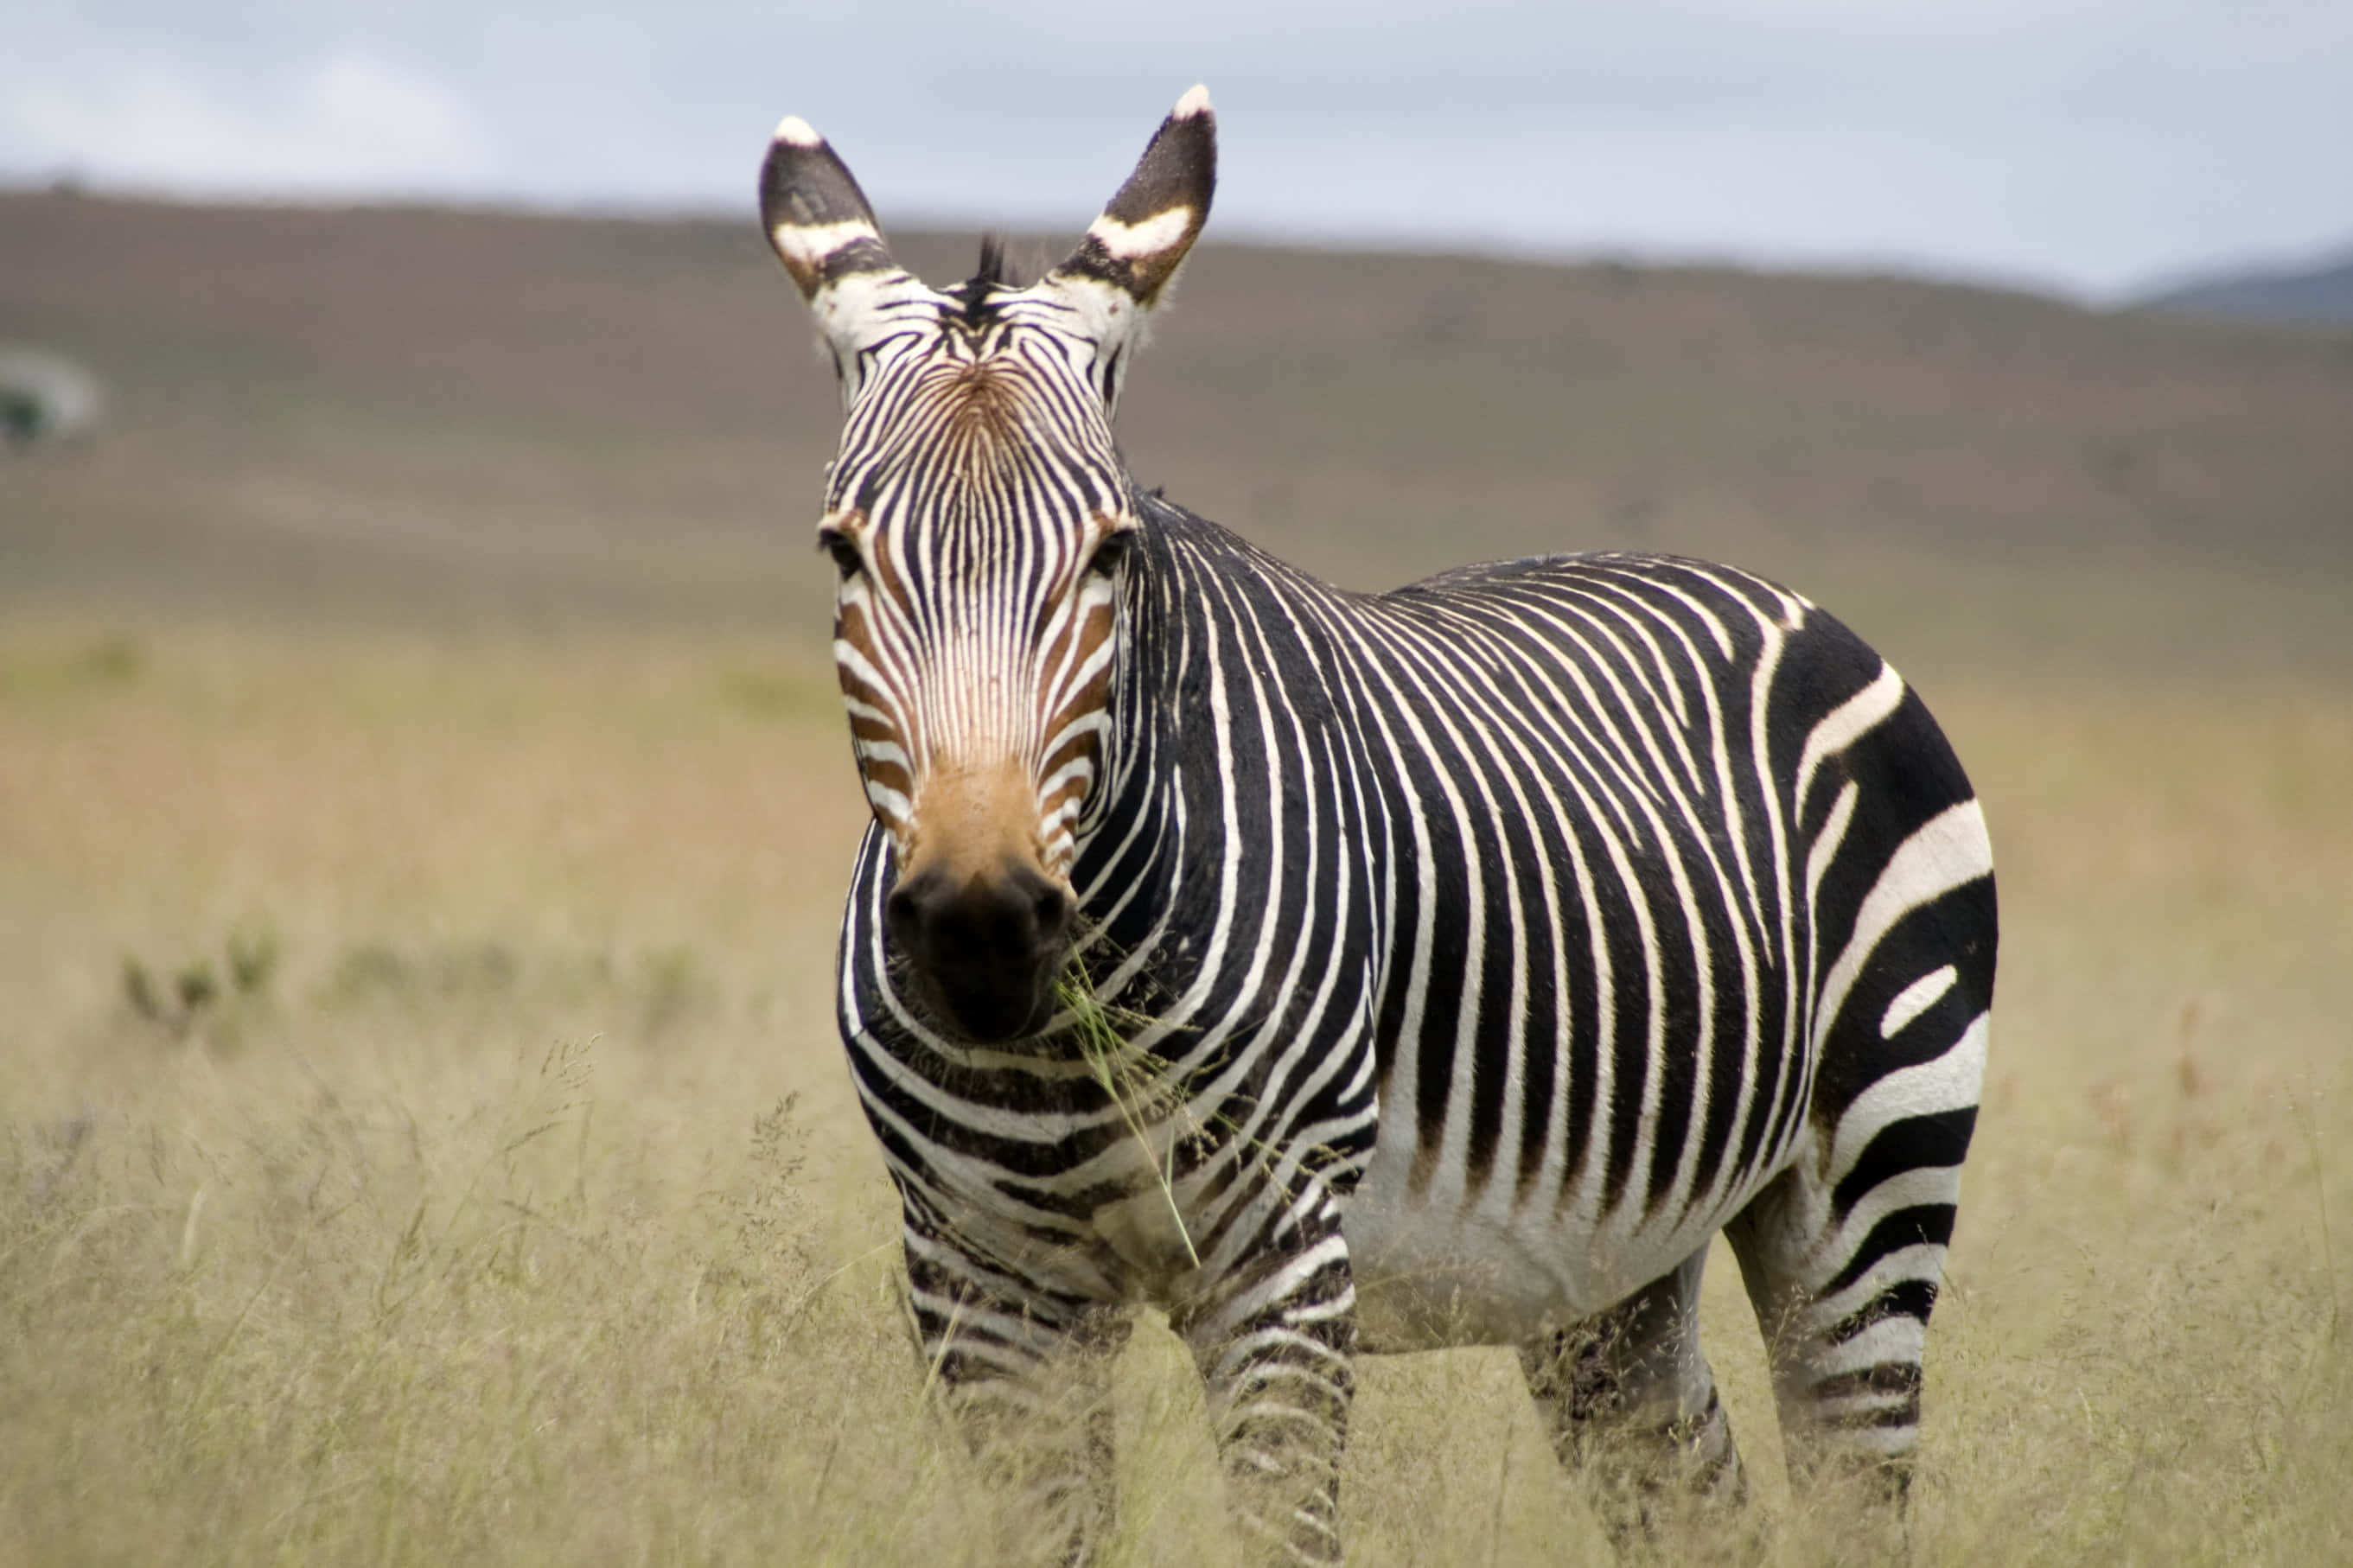 A black and white striped Zebra in profile walking through the sunlit African midlands.